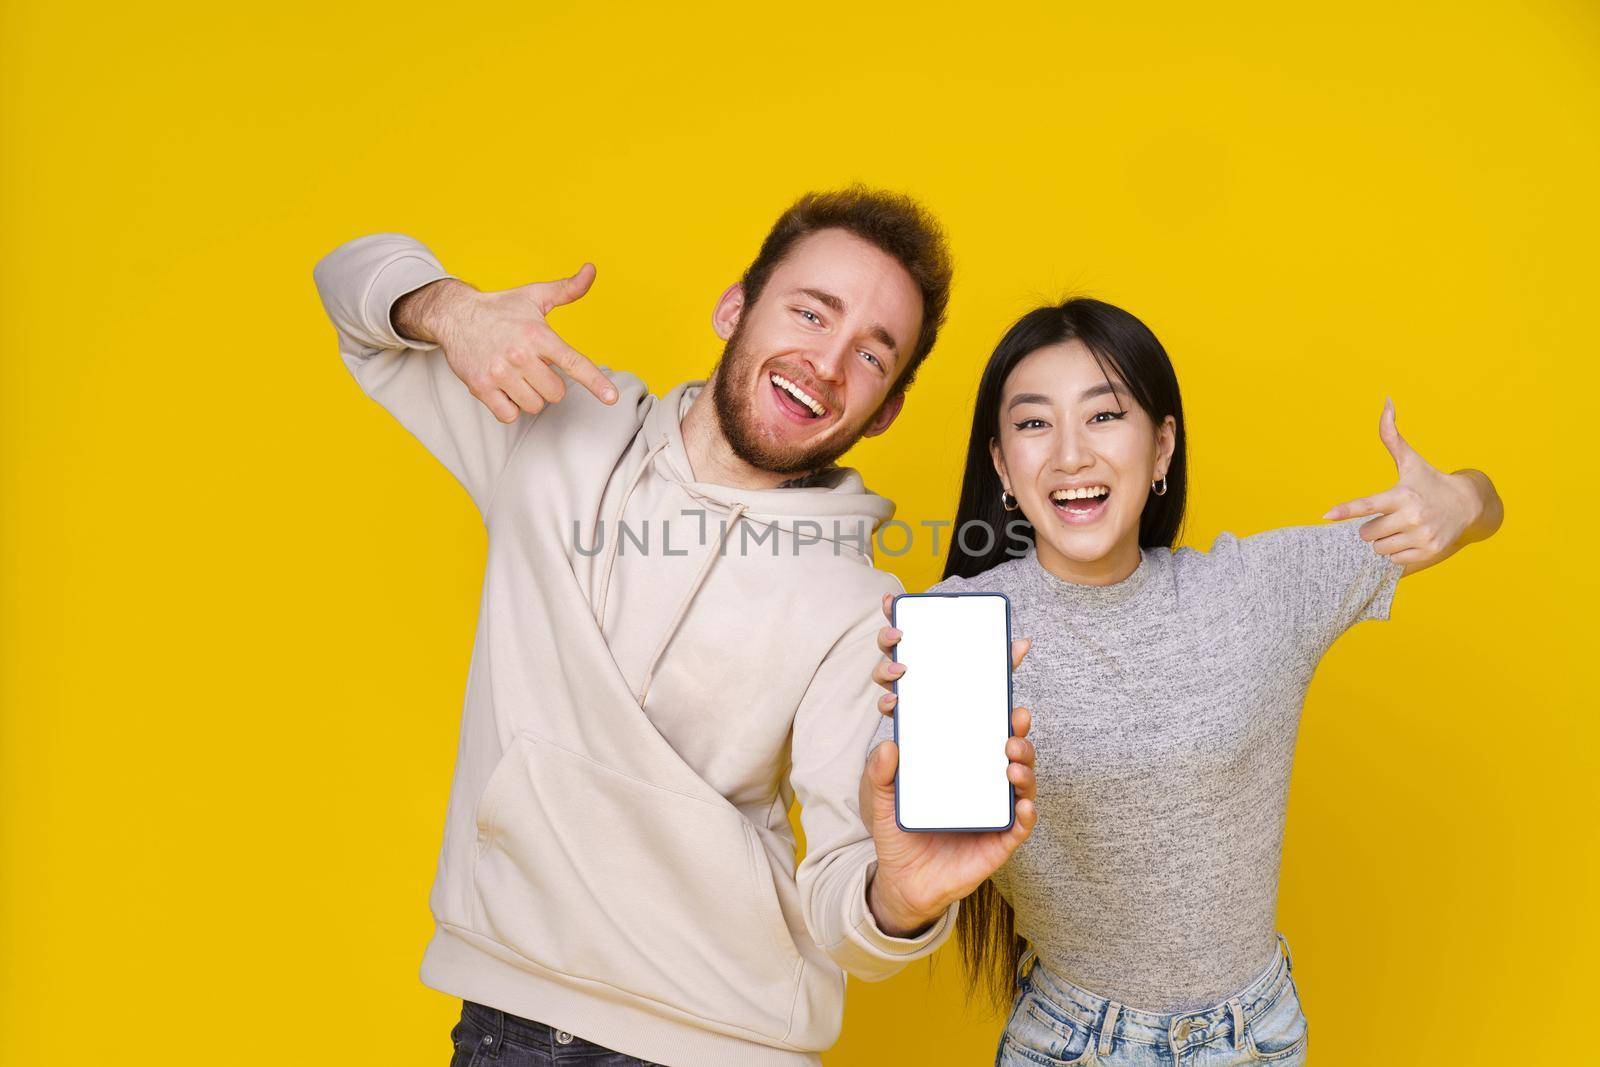 Asian girl and caucasian guy showing thumbs up holding smartphone showing blank white screen, mobile app advertisement and excited smile on camera isolated on yellow background. Product placement.